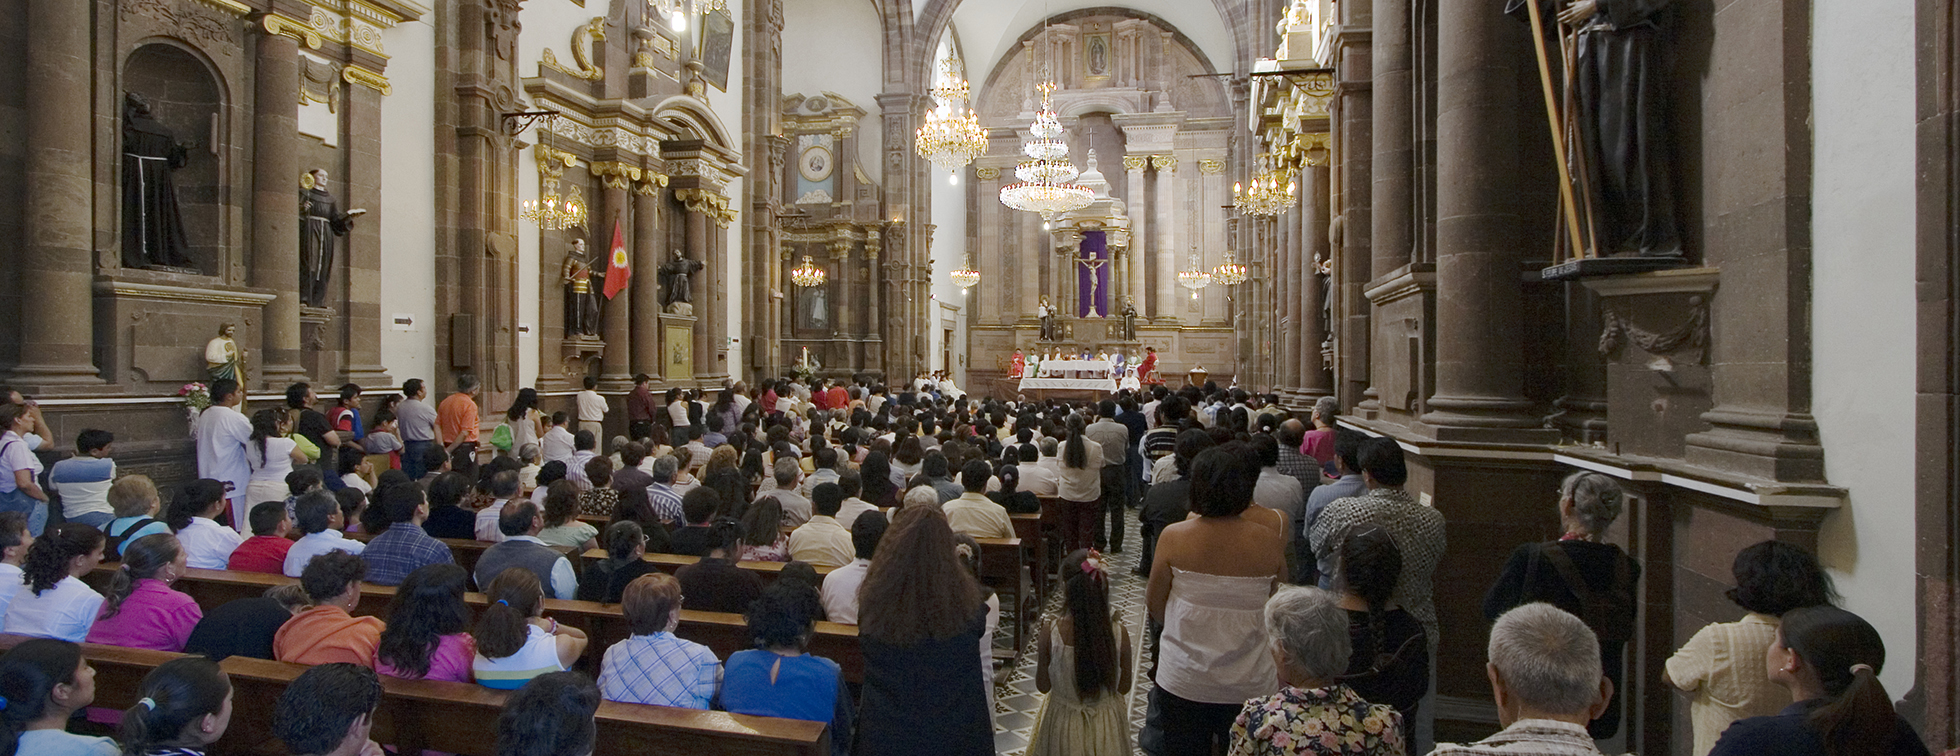 People attend a service at a Catholic church